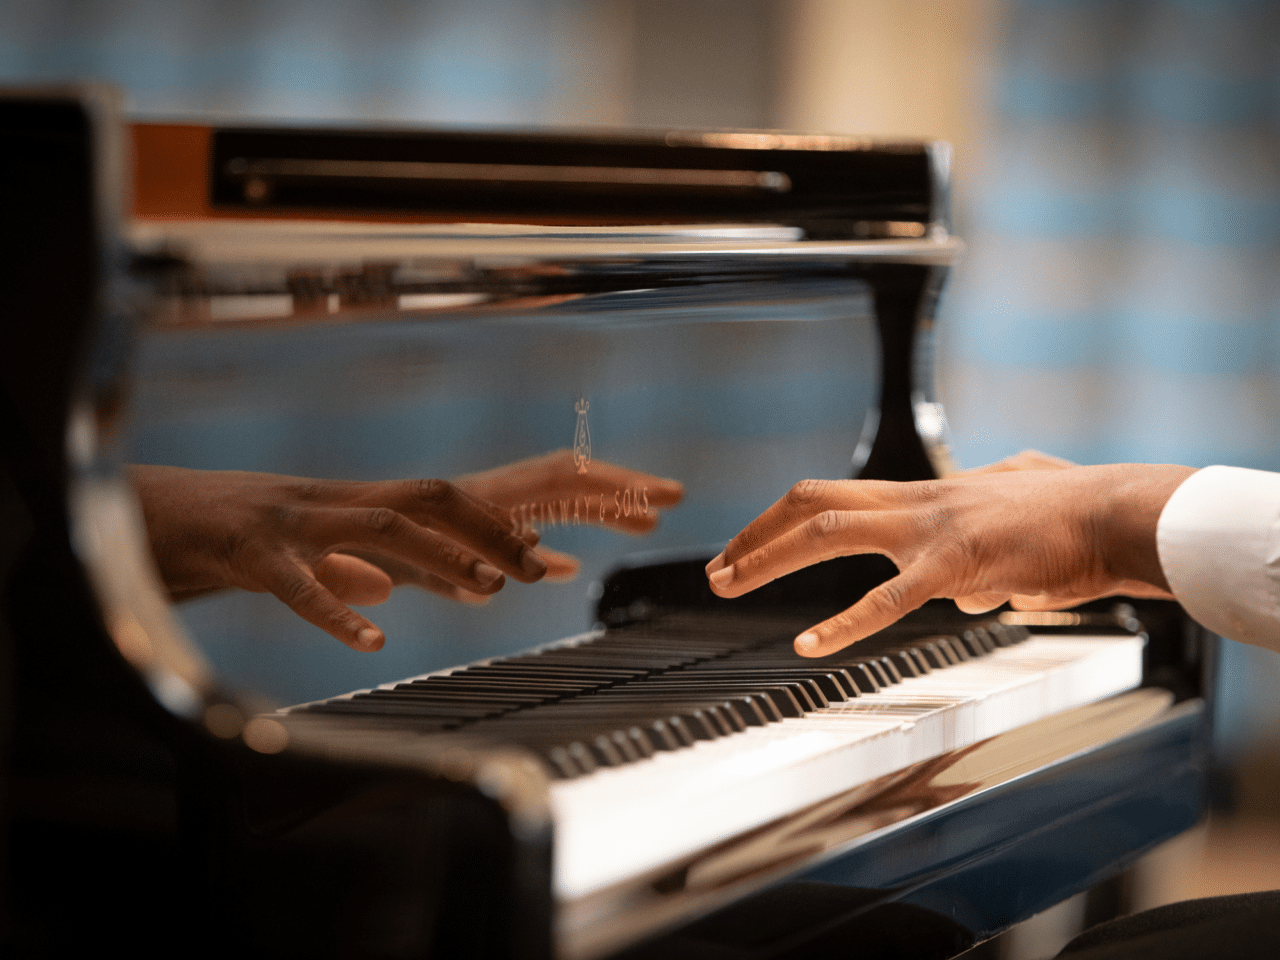 Hands on piano